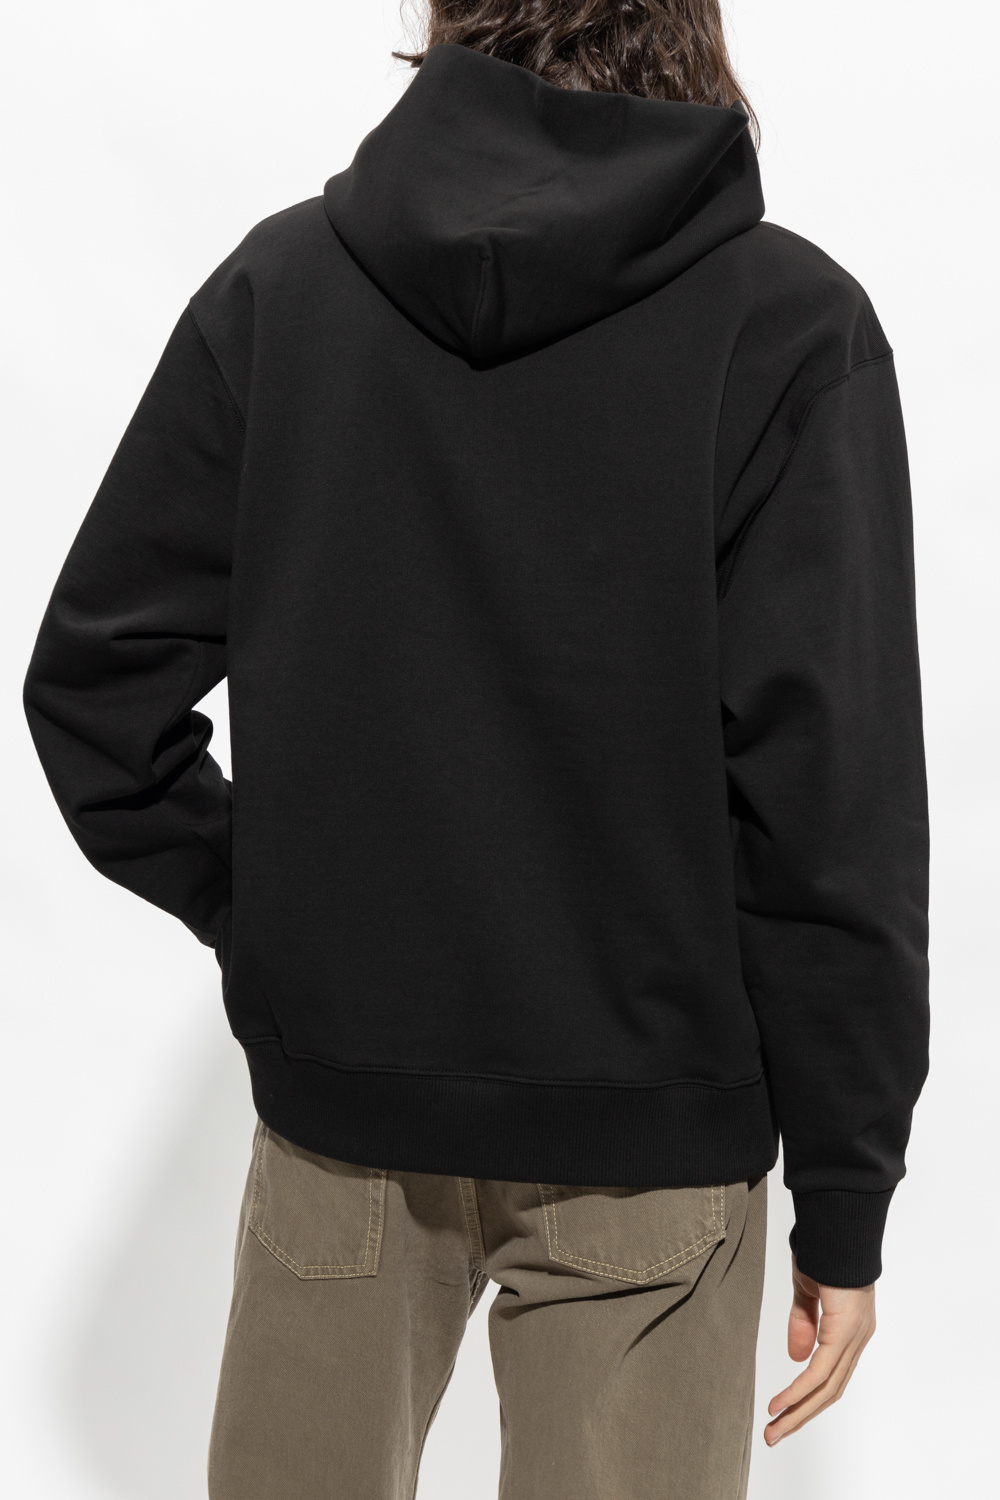 Kenzo Embroidered polvere hoodie